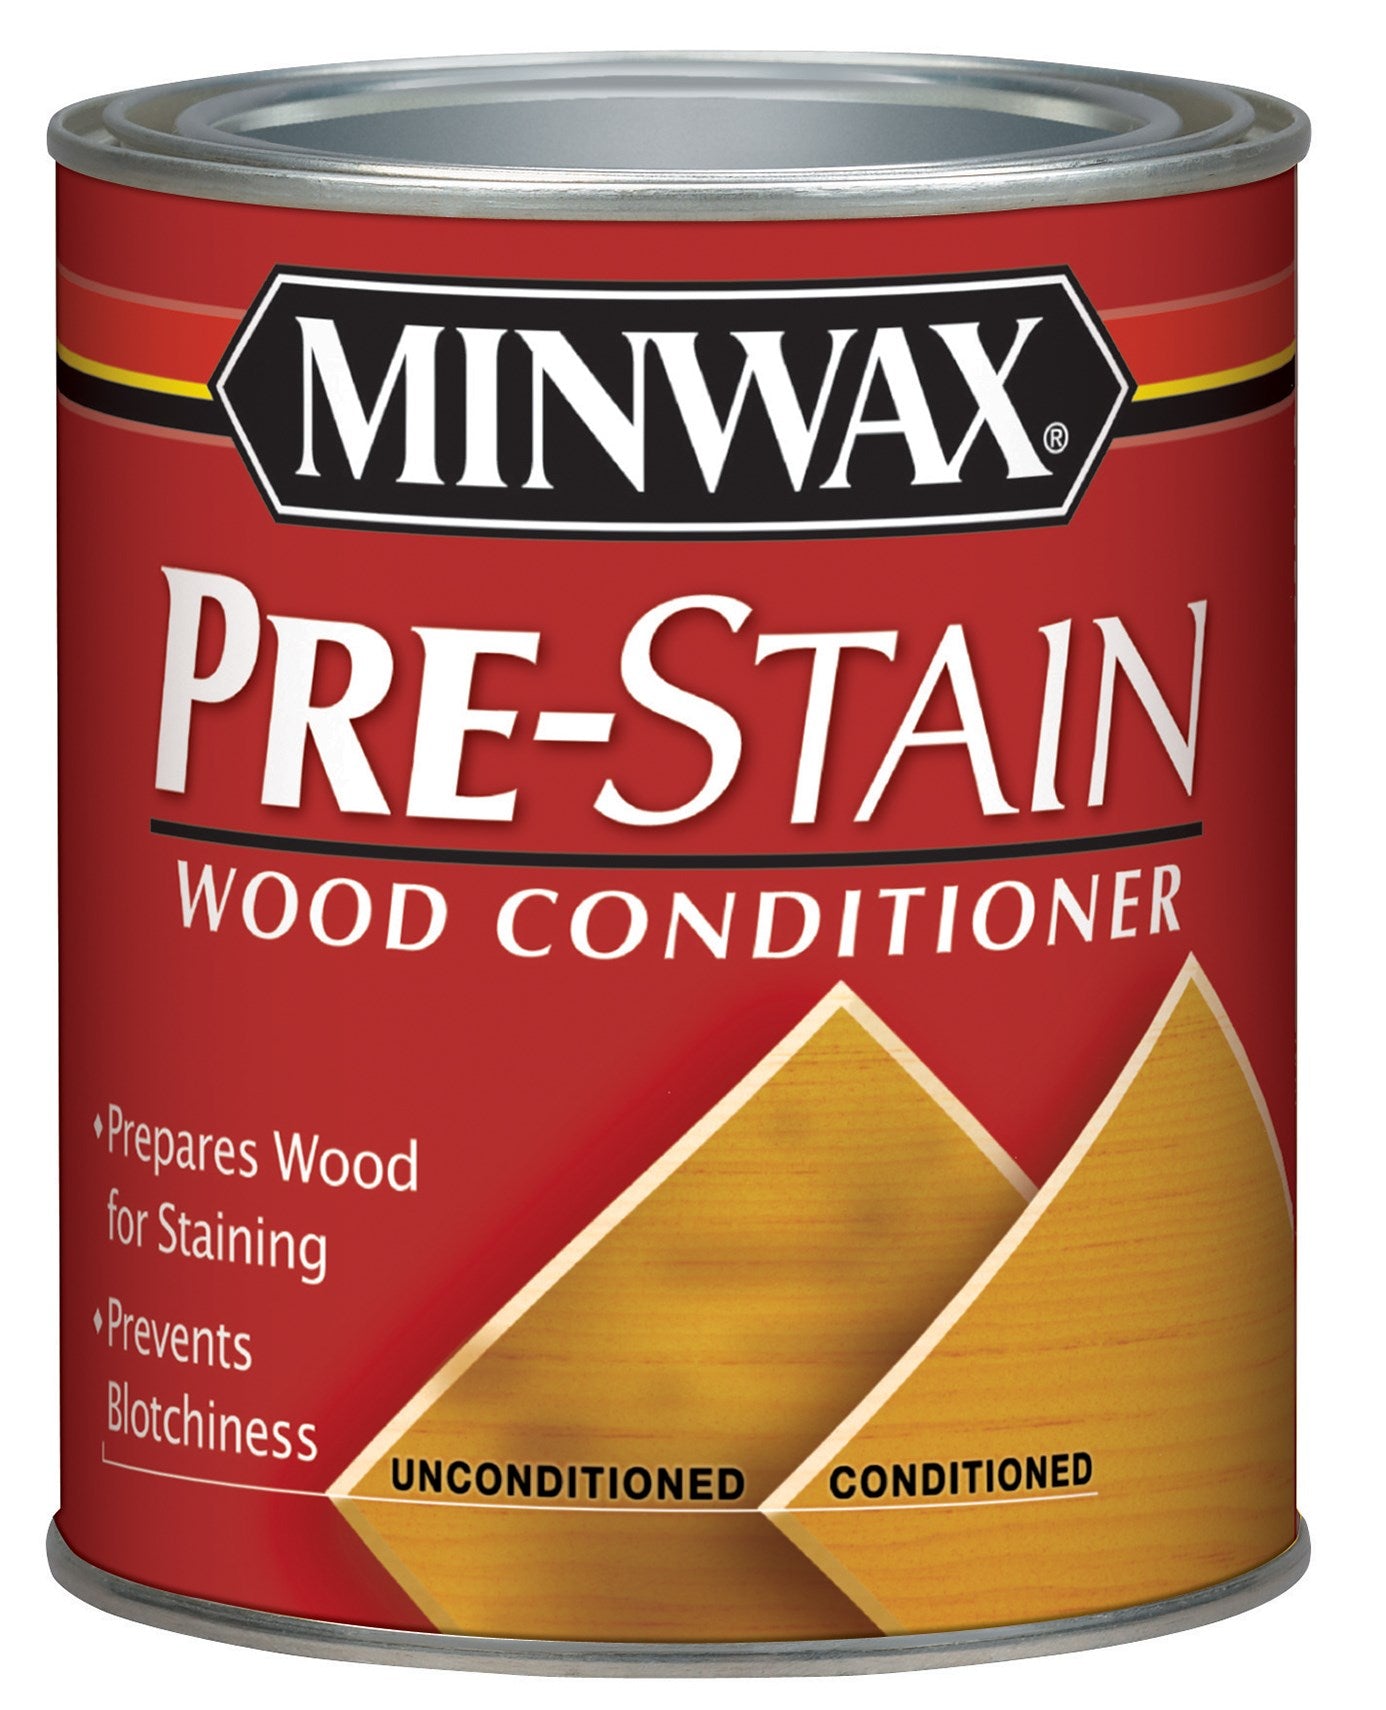 MINWAX, Minwax 61851 1 Qt Pre-Stain Wood Conditioner